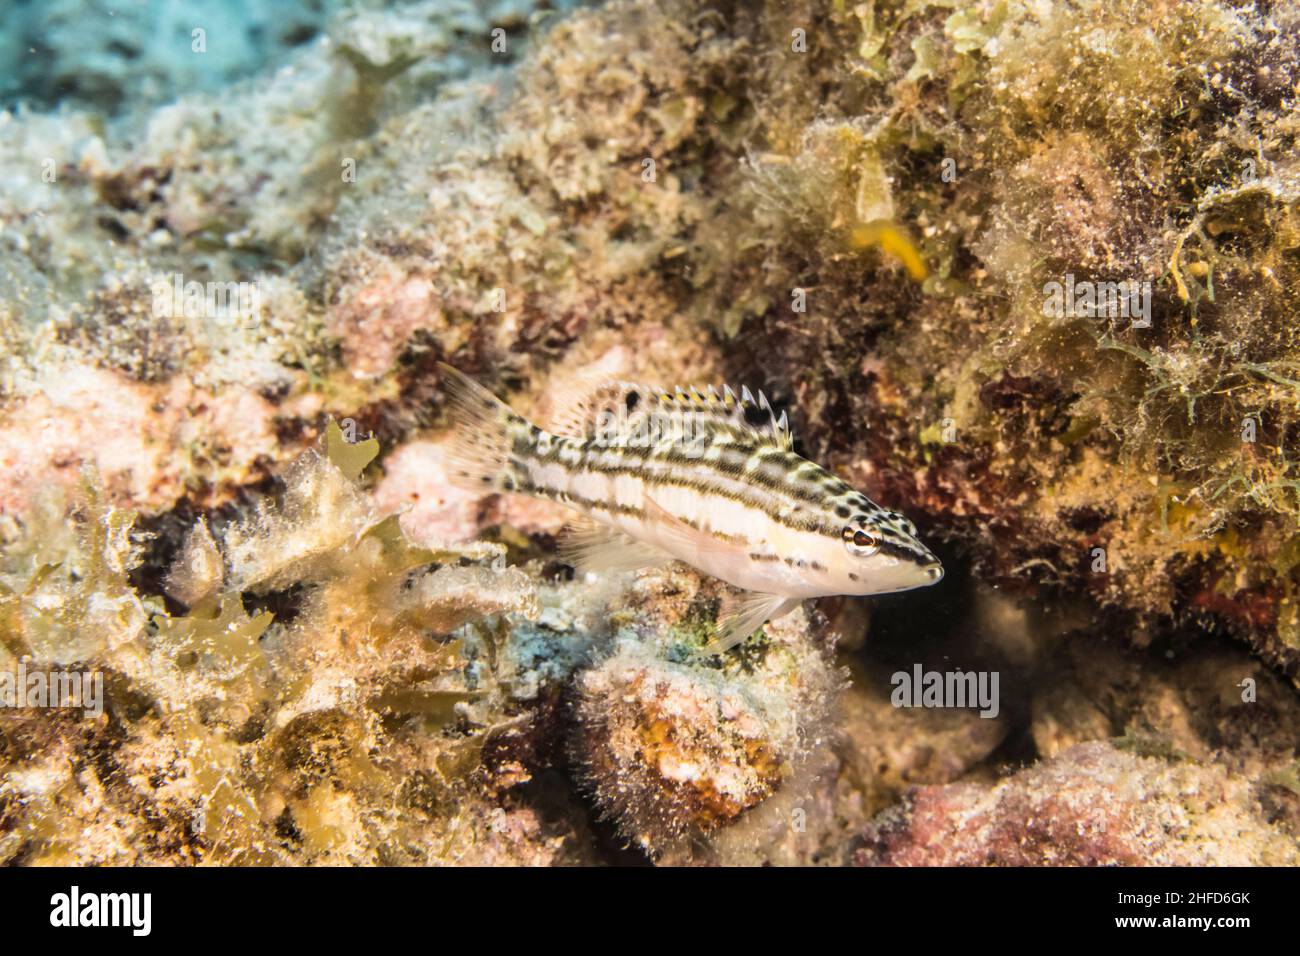 Seascape with juvenile Harlequin Bass fish, coral, and sponge in the coral reef of the Caribbean Sea, Curacao Stock Photo